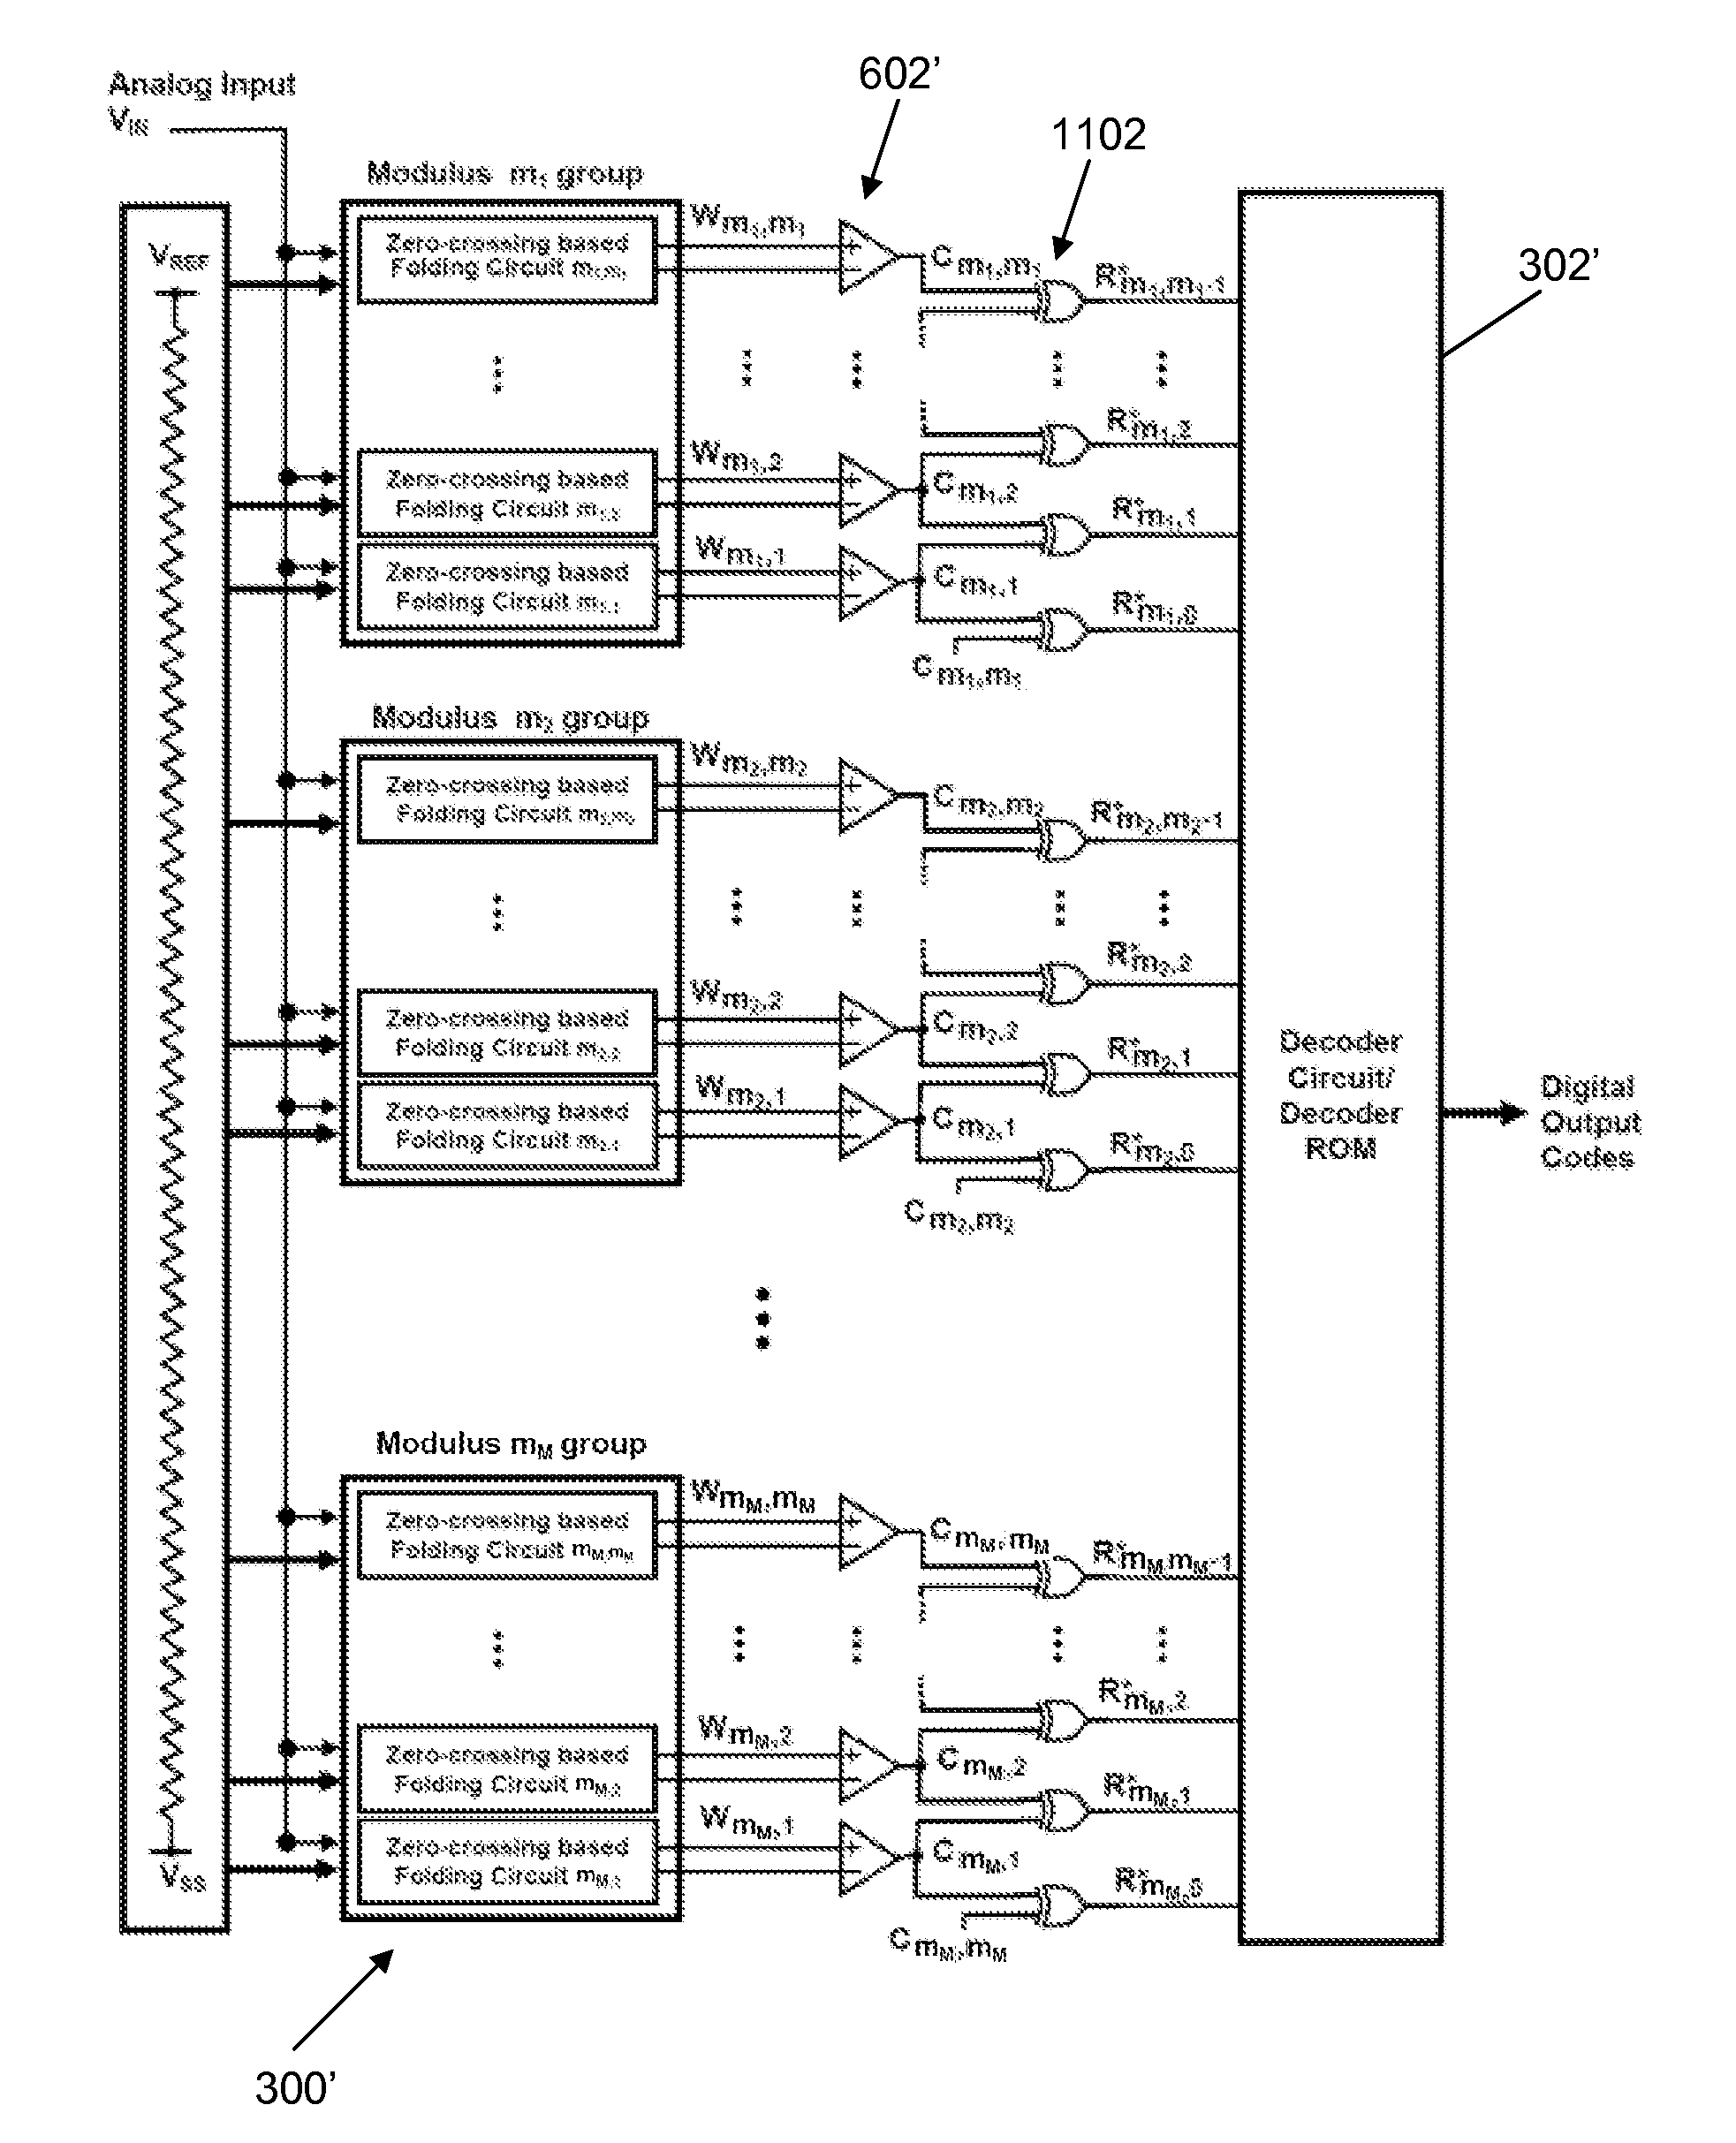 System for rns based analog-to-digital conversion and inner product computation